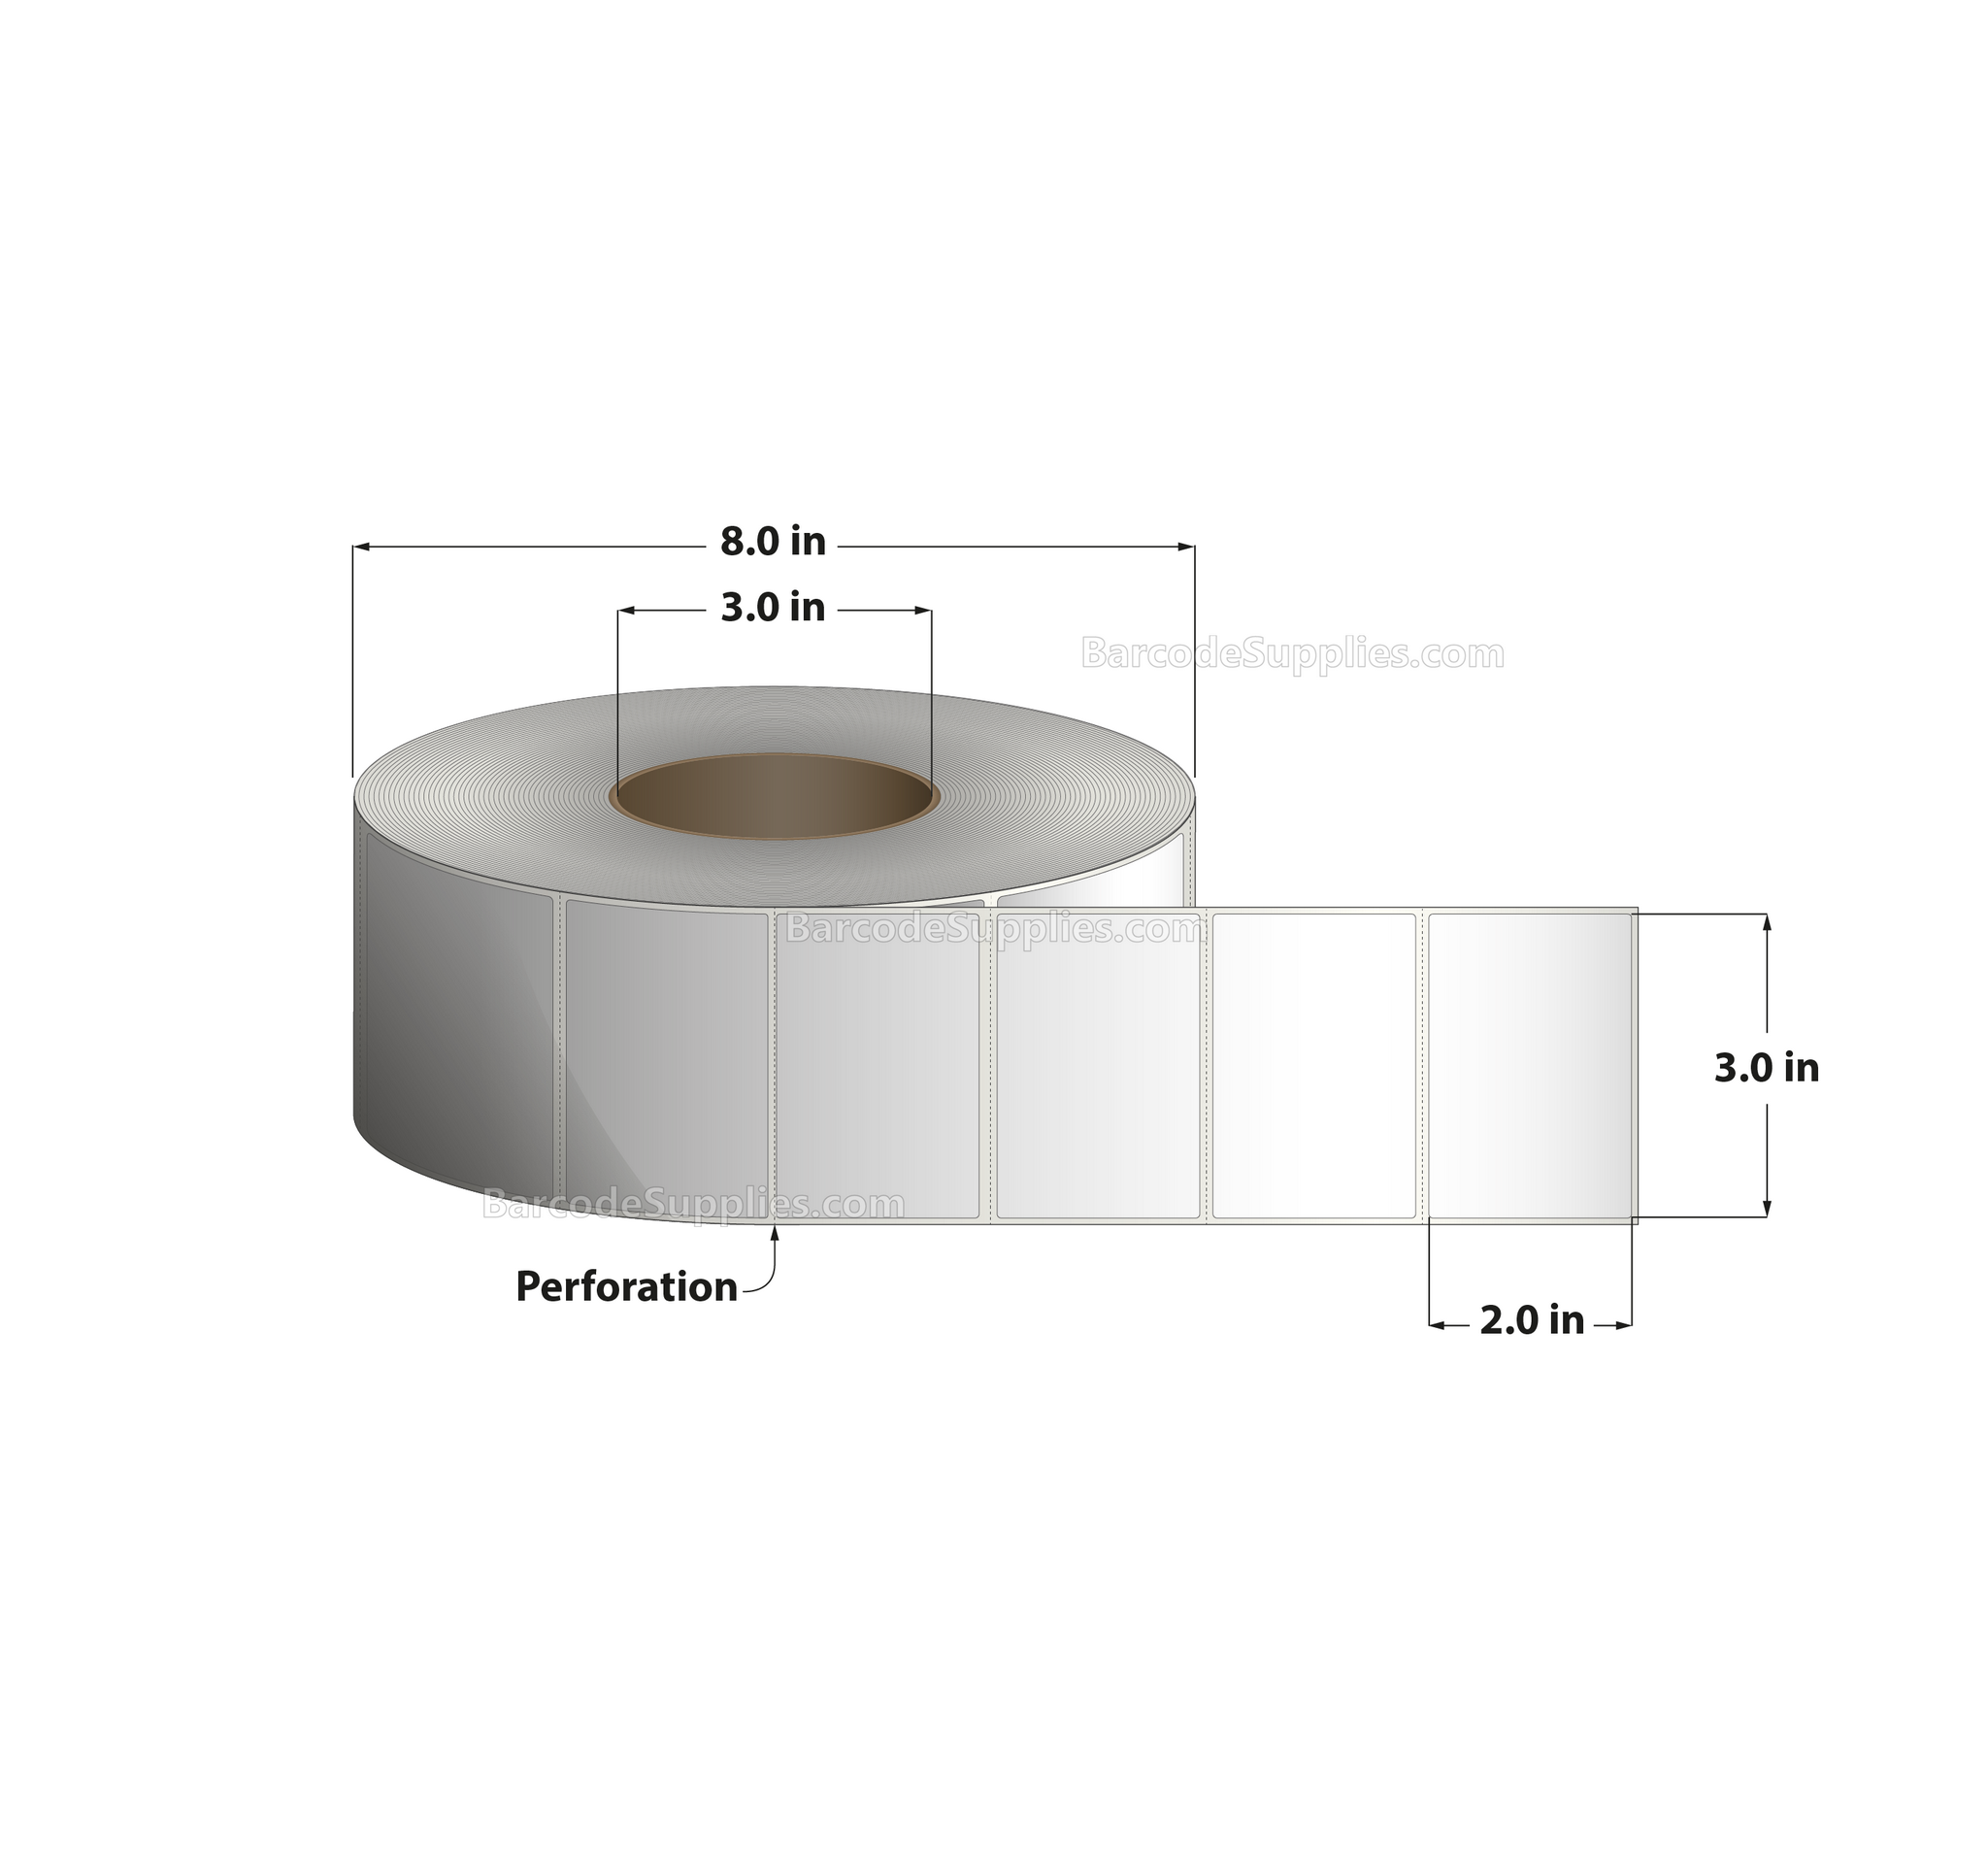 3 x 2 Thermal Transfer White Labels With Permanent Adhesive - Perforated - 2750 Labels Per Roll - Carton Of 8 Rolls - 22000 Labels Total - MPN: RSP-3-2-2750-3